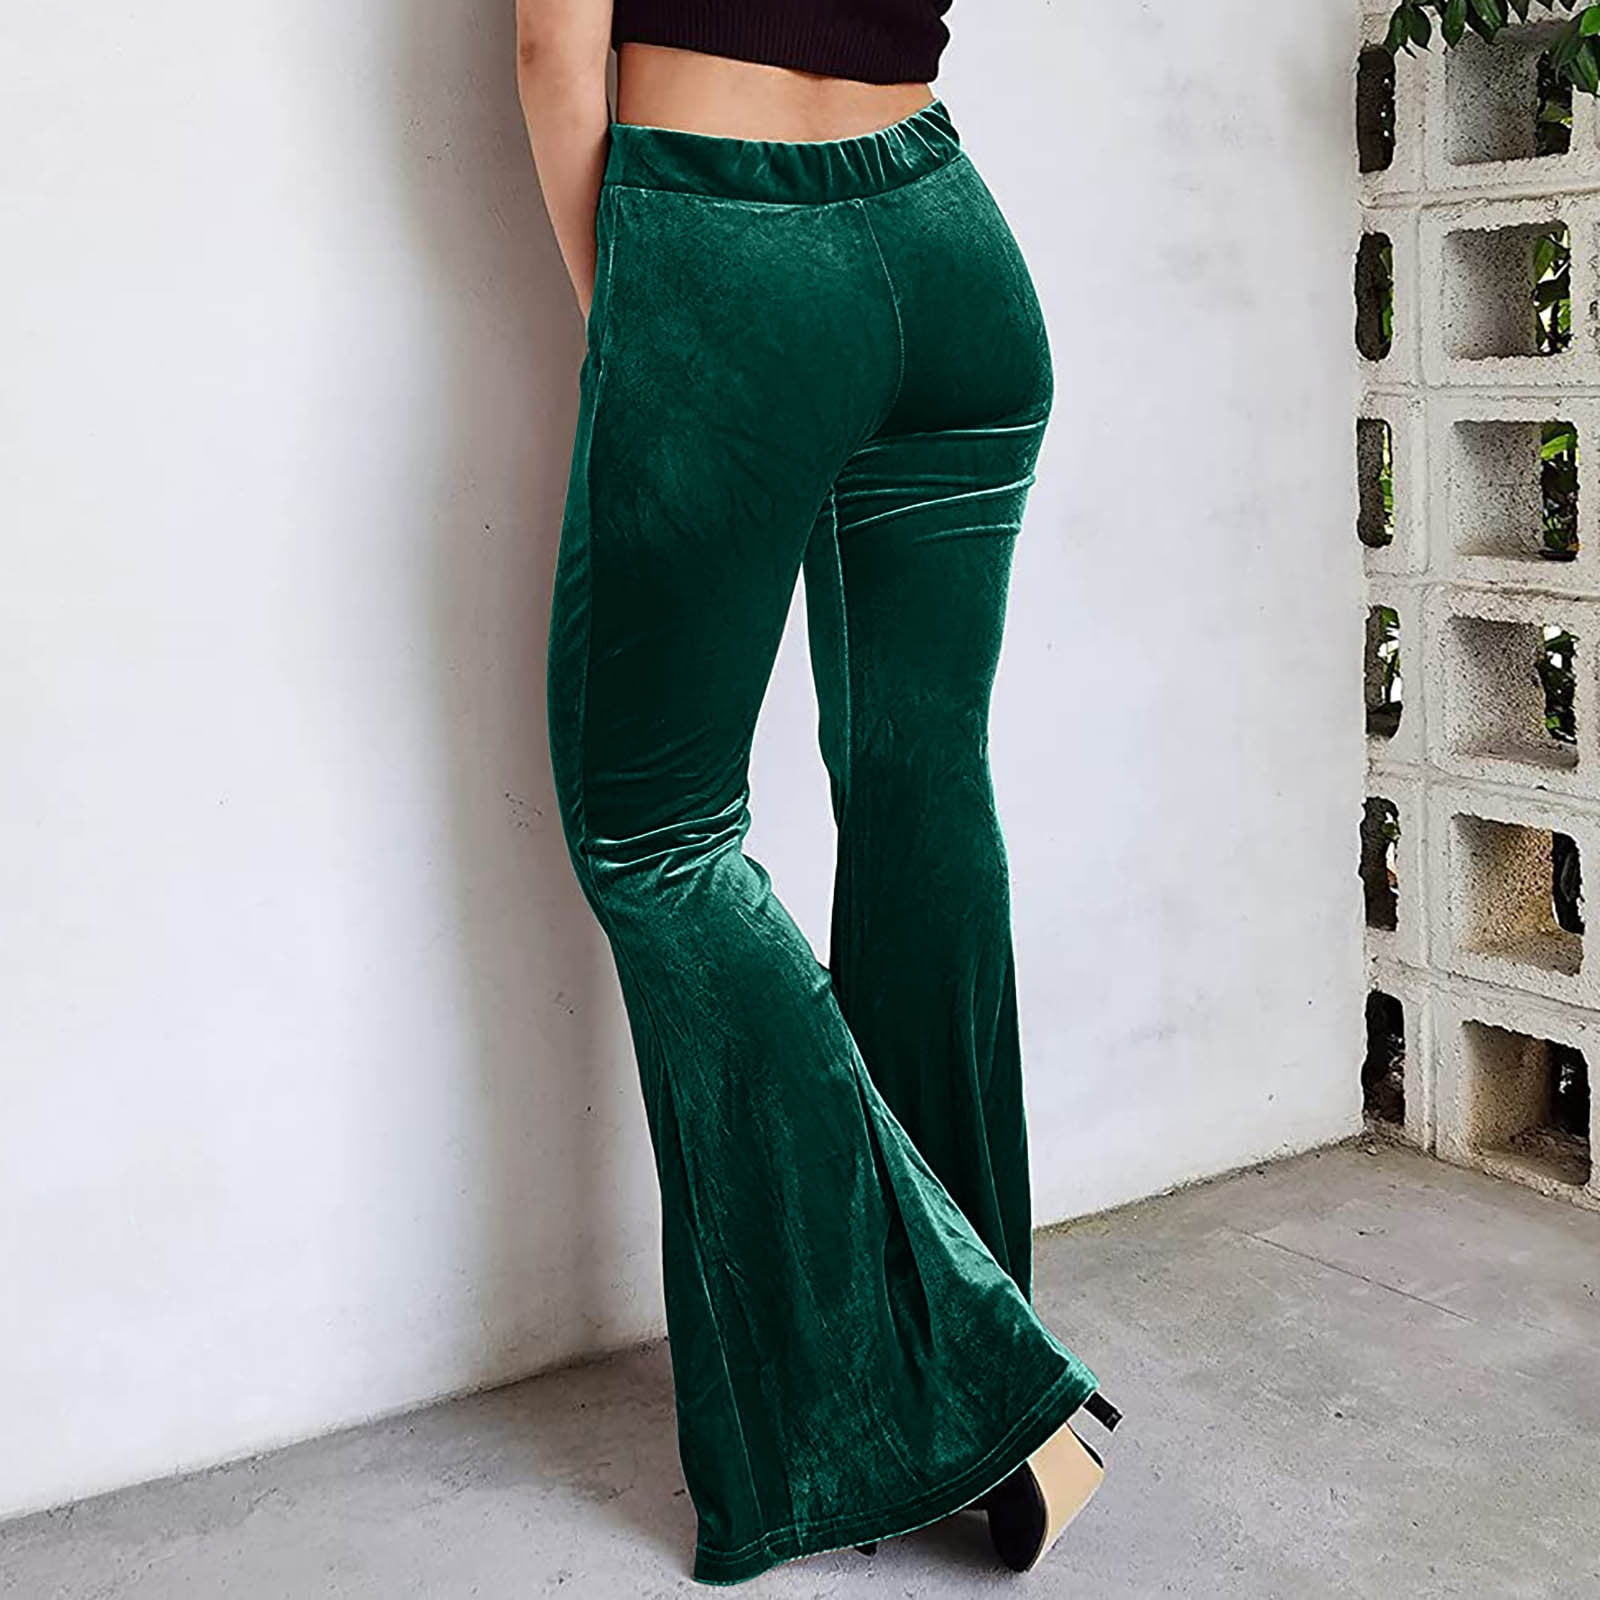 Buy Leggings for Women, Yoga Pants, Belly Dance Pants, Bell Bottom Pants,  Festival Clothes, Low Waist Leggings, Summer Fashion, Pink Pants Online in  India - Etsy